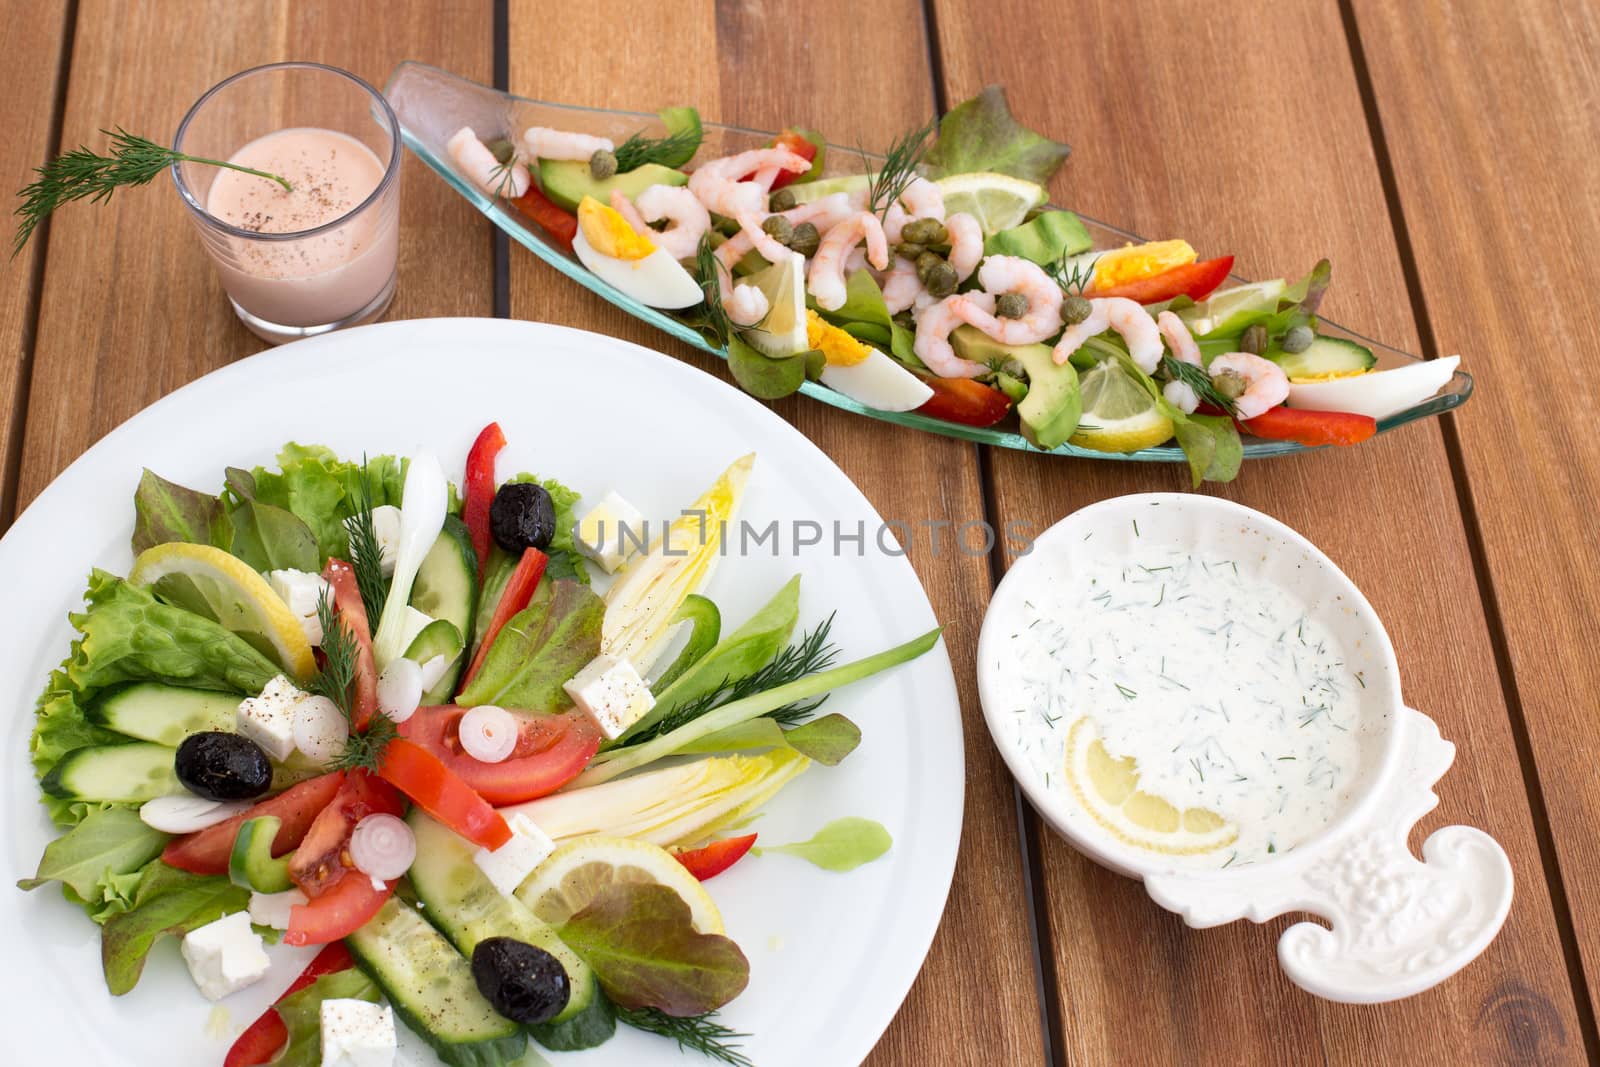 Composition of greek salad and shrimp cocktail on a wooden table.